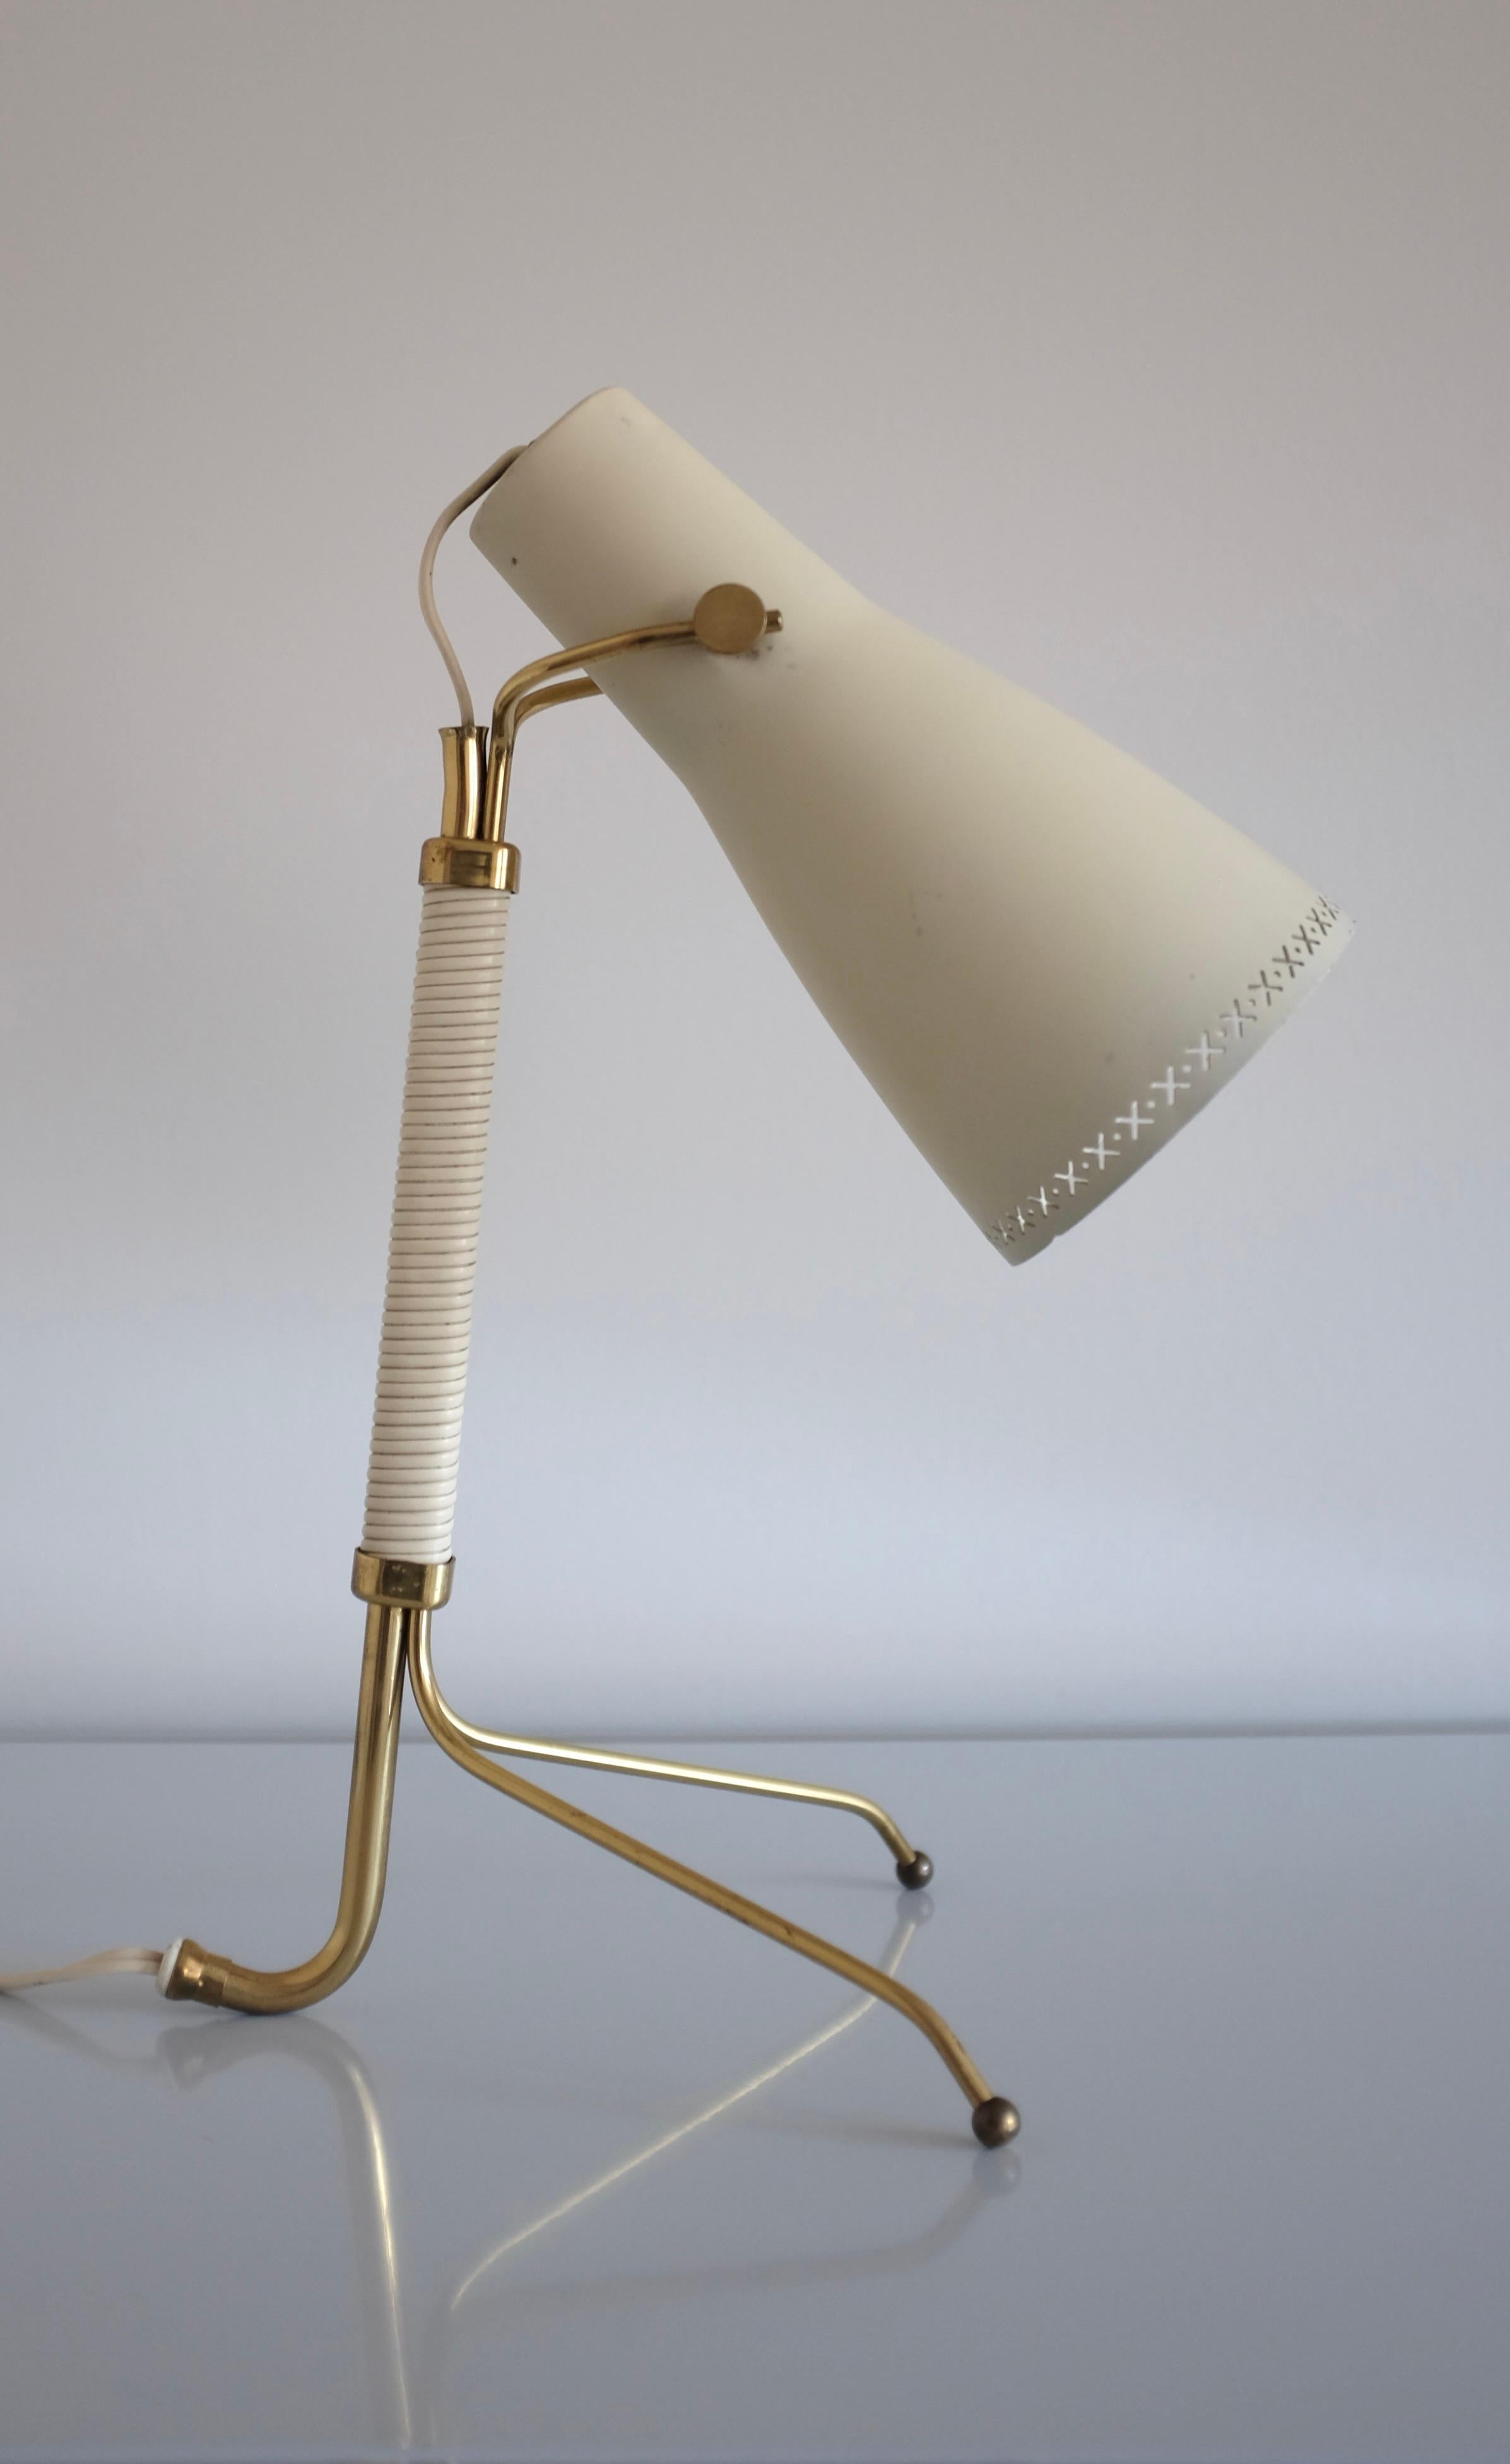 Rare Table lamp Modell E1271 by ASEA, Sweden, from around the 1950s. Star shape perforated details on the edge of the lacquered metal shade on a brass lamp arm that finishes in a tripod. Great vintage condition with original details such as makers